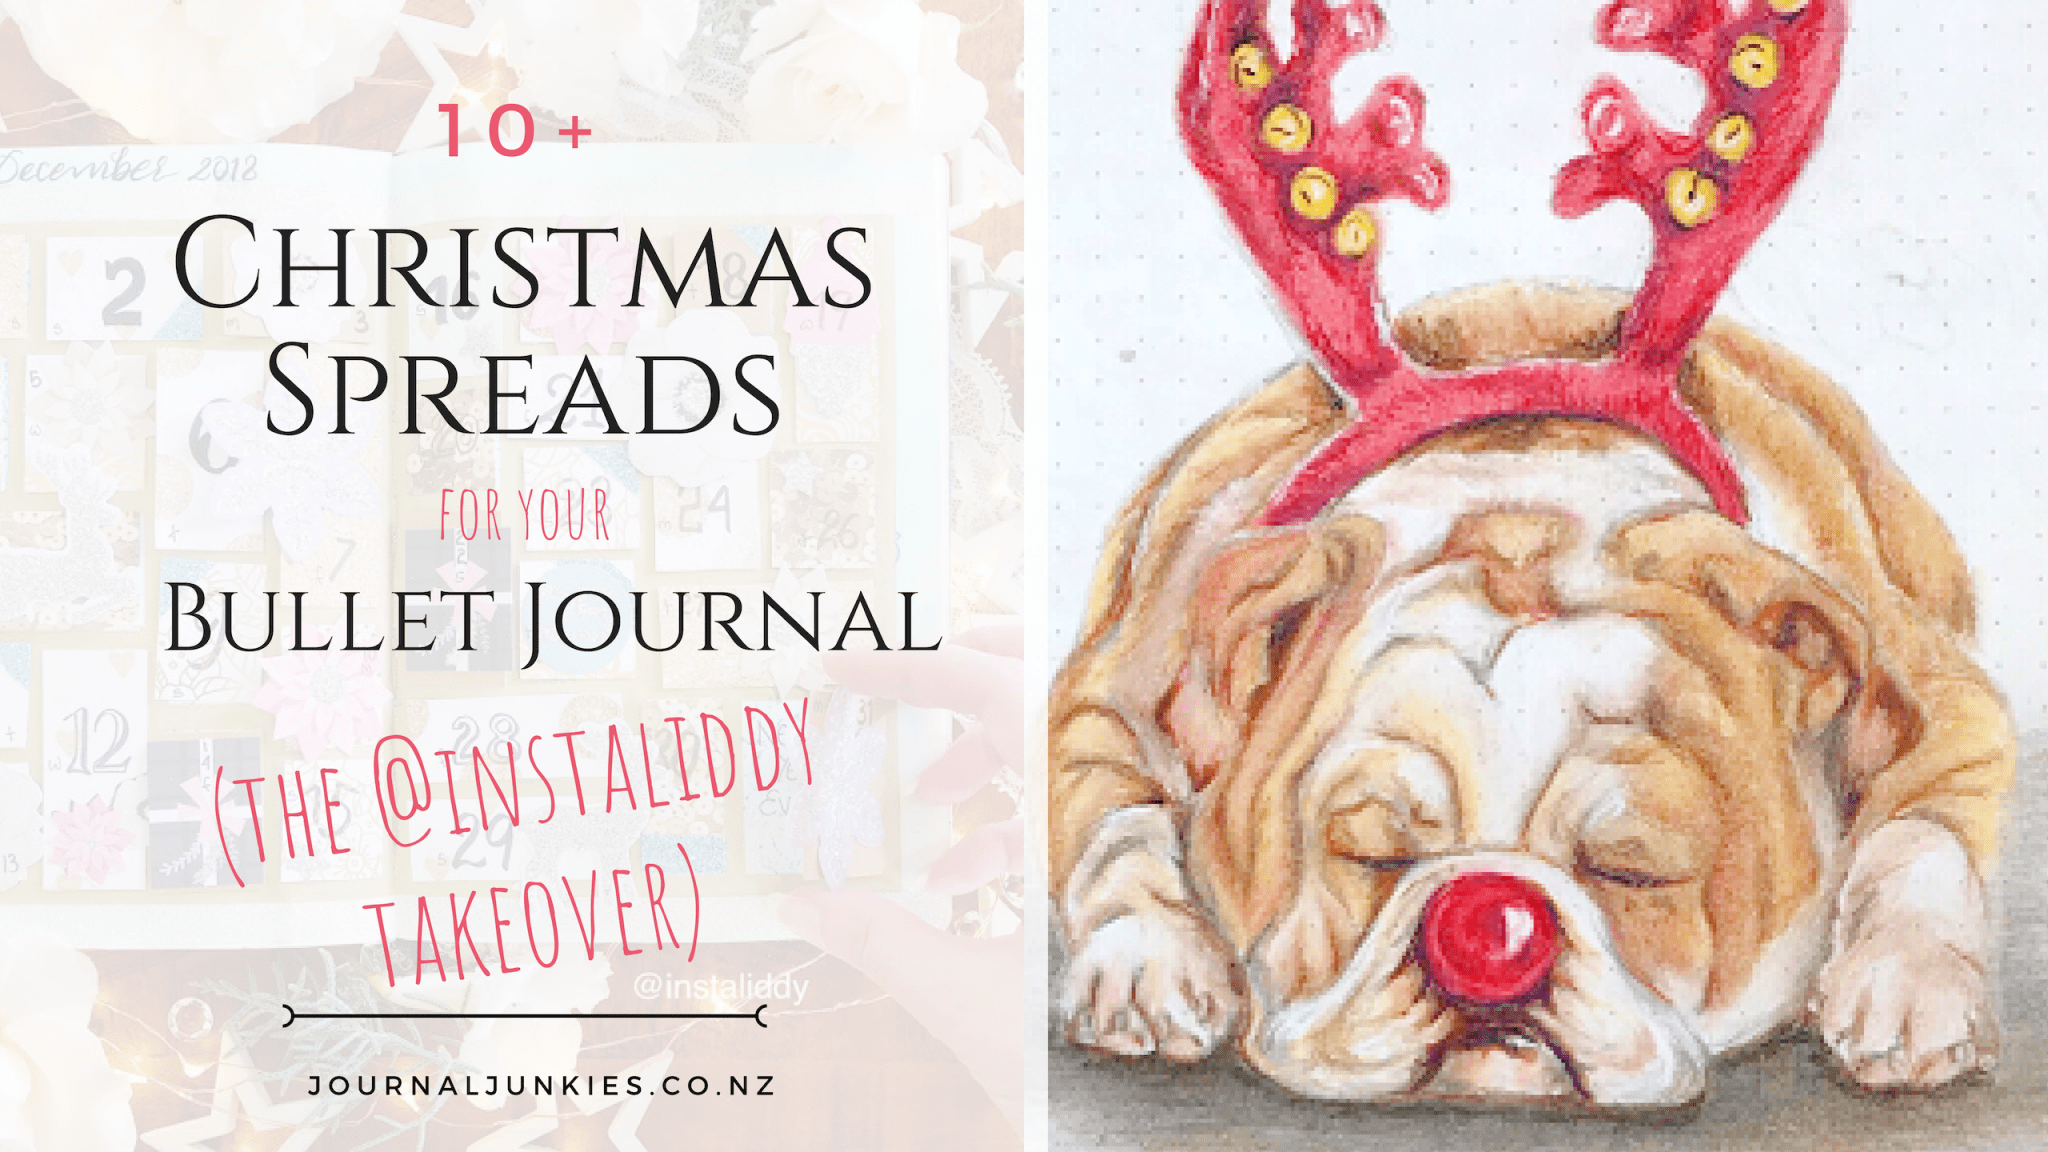 Christmas Spreads for Your Bullet Journal to help you keep it together| The @Instaliddy Takeover!